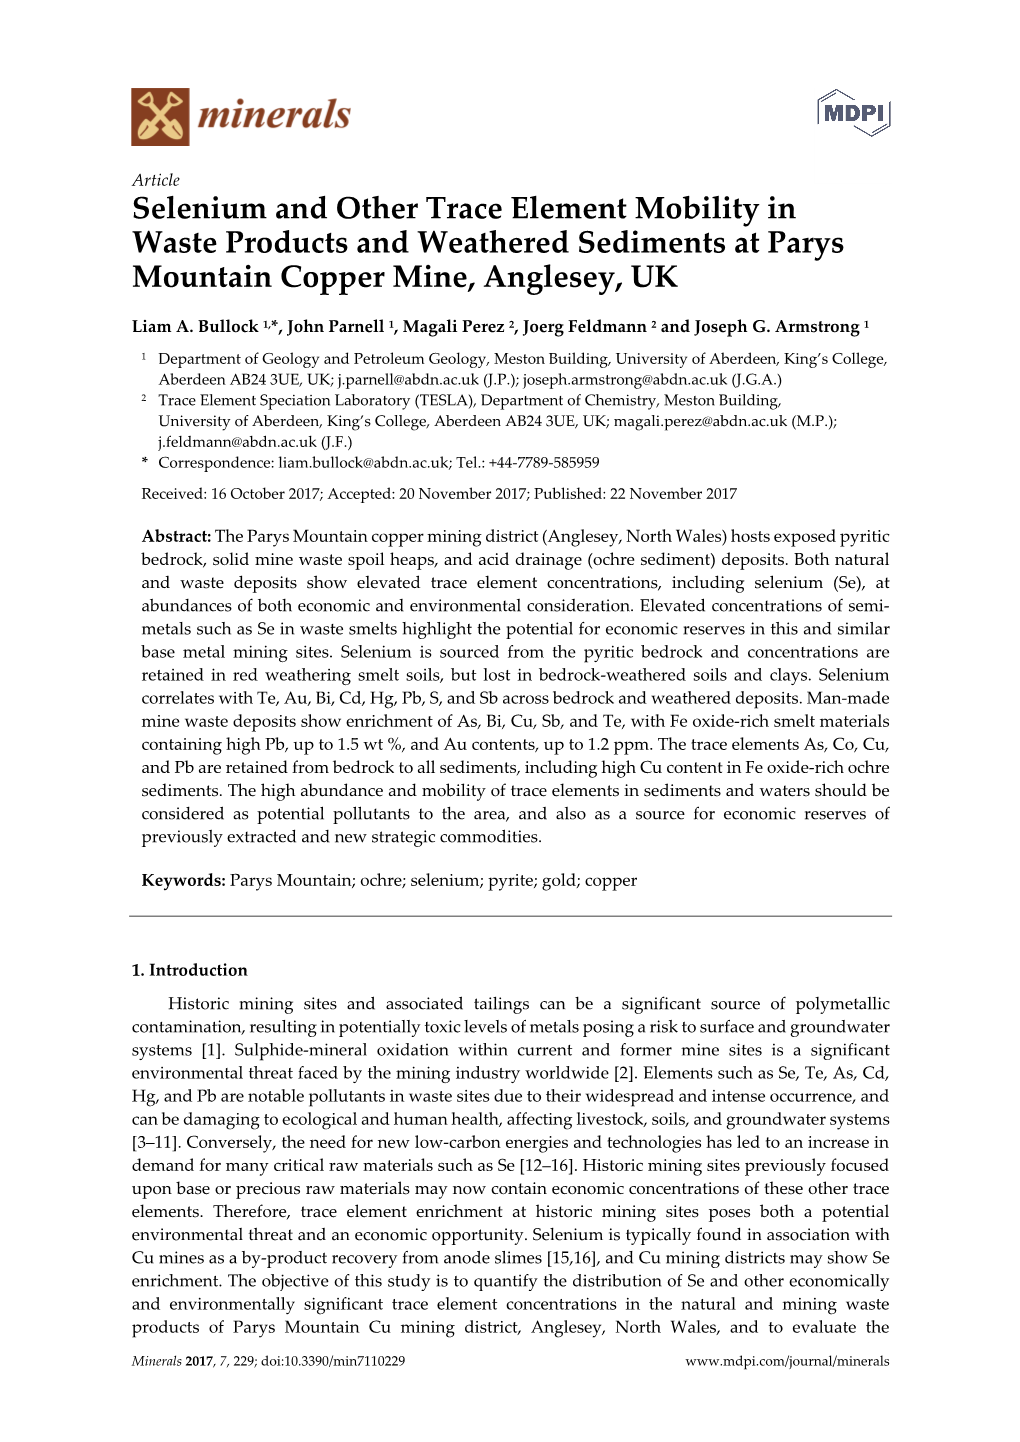 Selenium and Other Trace Element Mobility in Waste Products and Weathered Sediments at Parys Mountain Copper Mine, Anglesey, UK